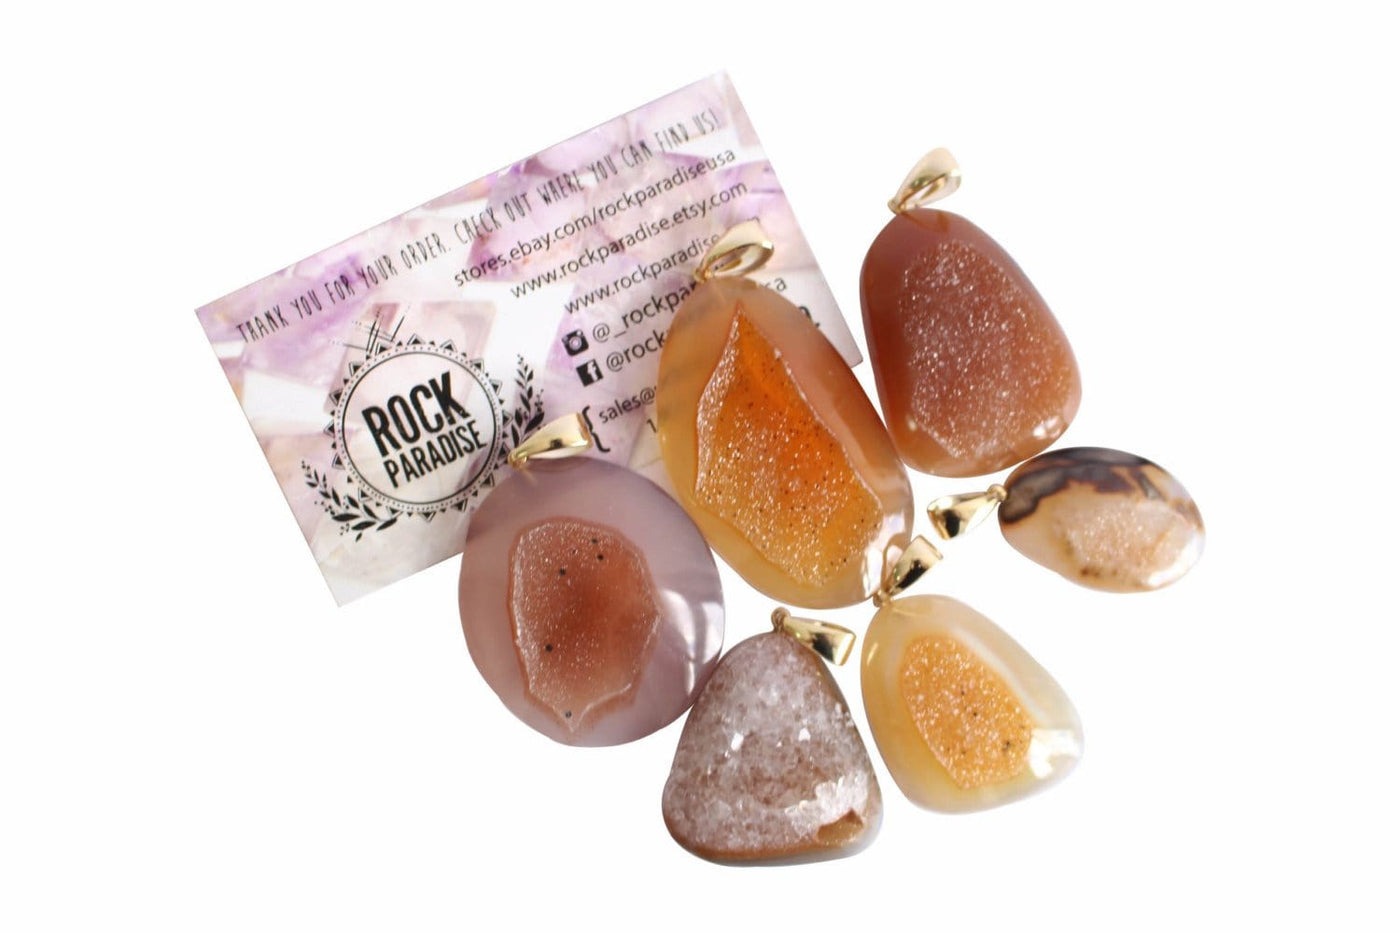 6 amber natural druzy cabochon being displayed on a white background next to one of our Rock paradise business cards.